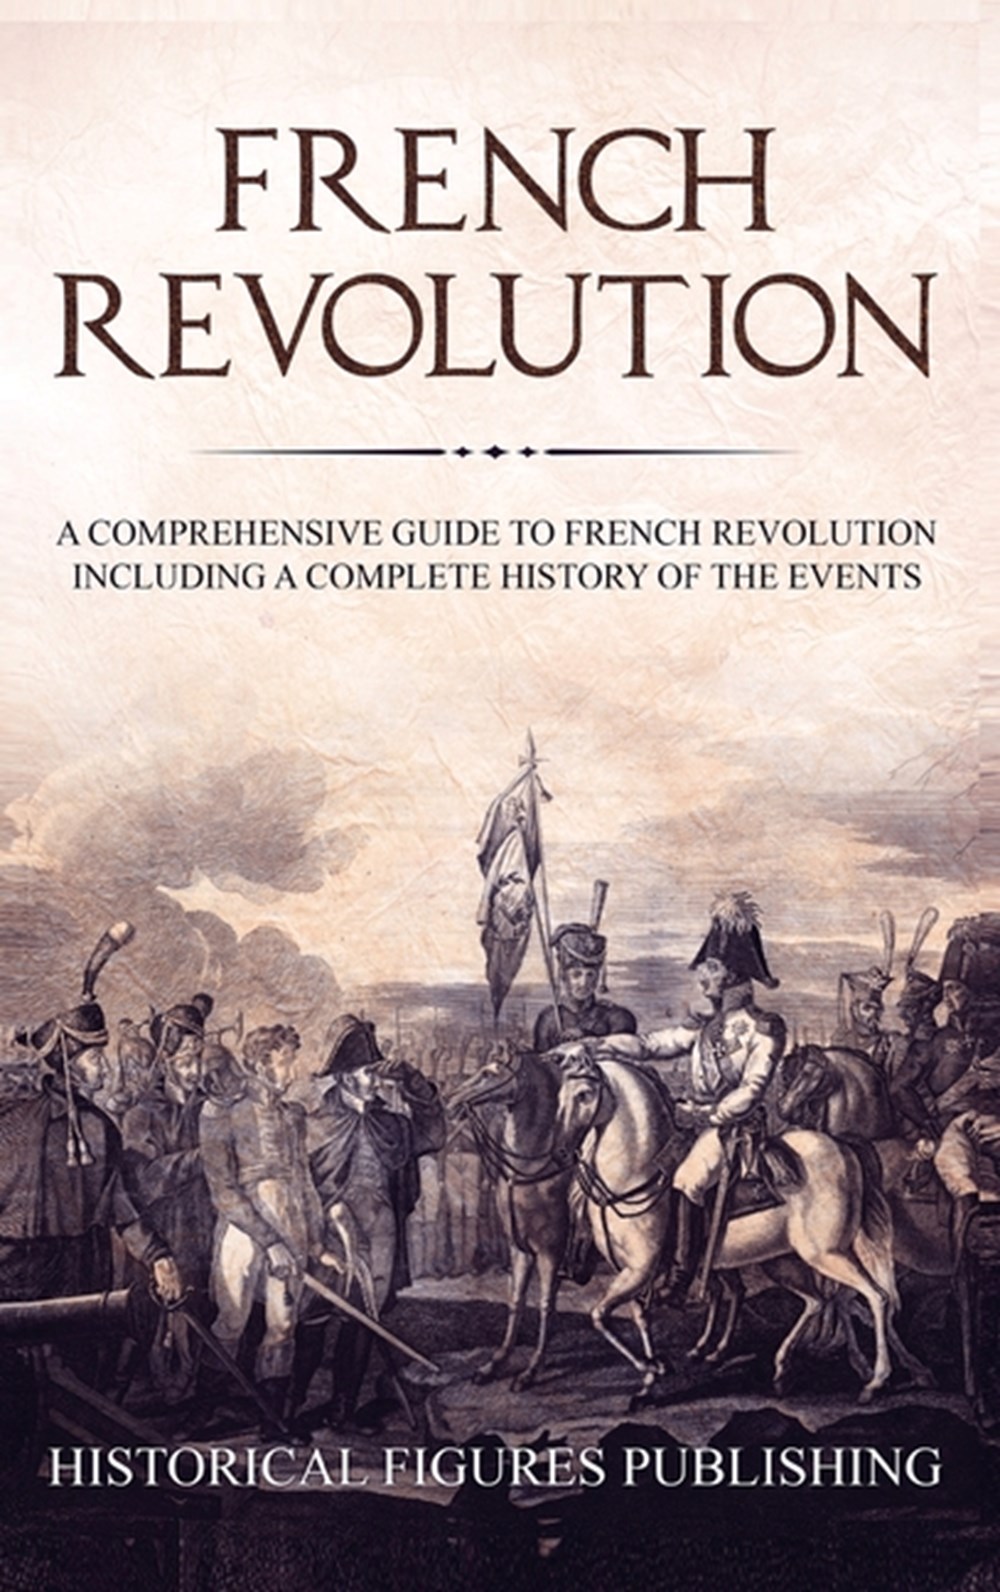 French Revolution: A Comprehensive Guide to the French Revolution Including a Complete History of th